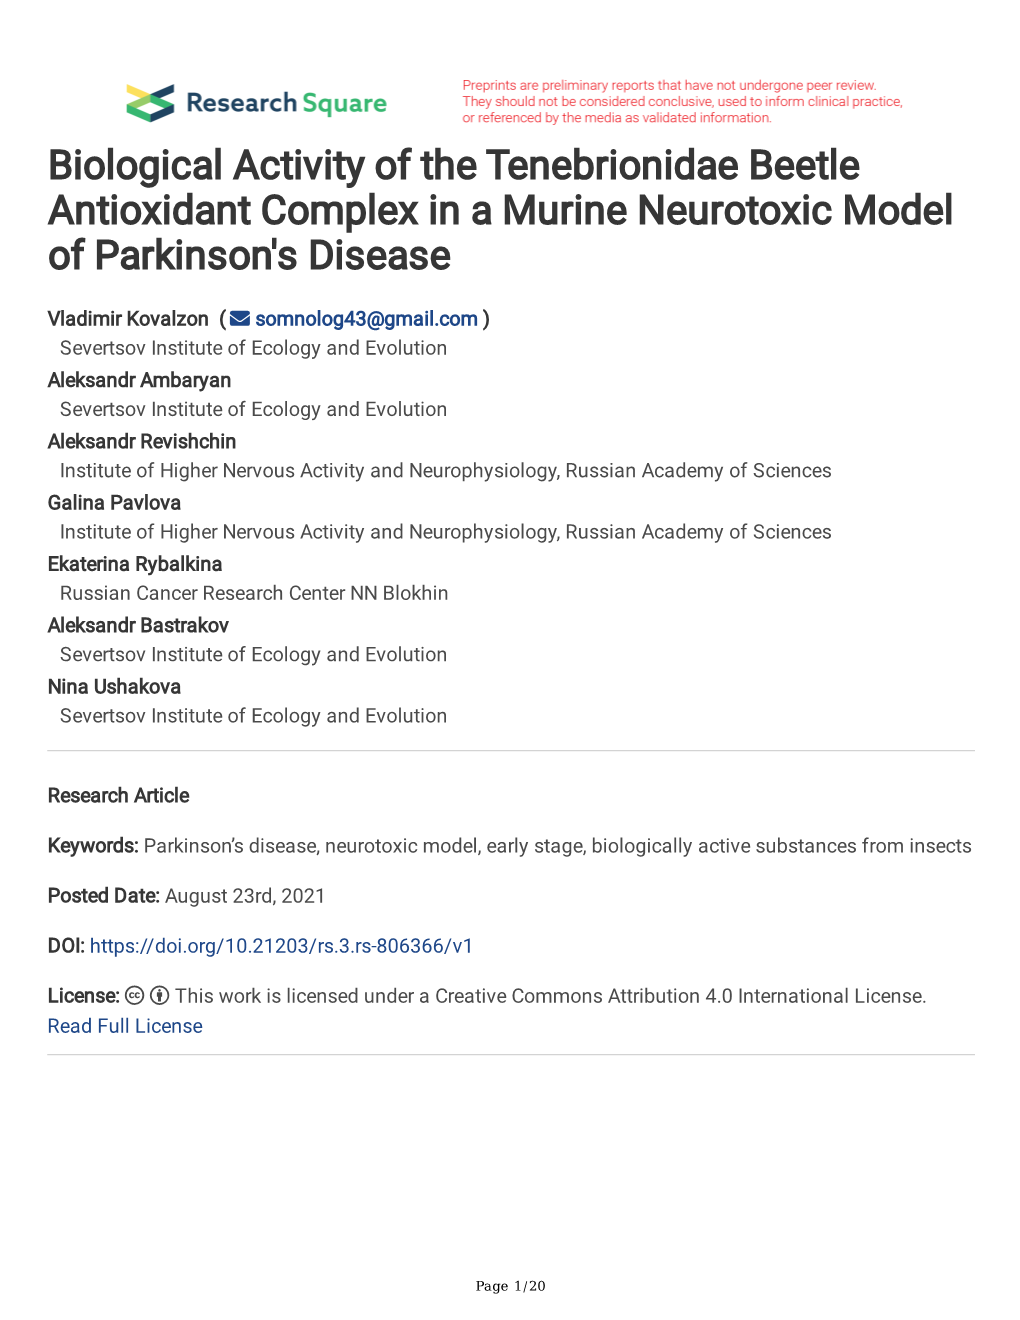 Biological Activity of the Tenebrionidae Beetle Antioxidant Complex in a Murine Neurotoxic Model of Parkinson's Disease